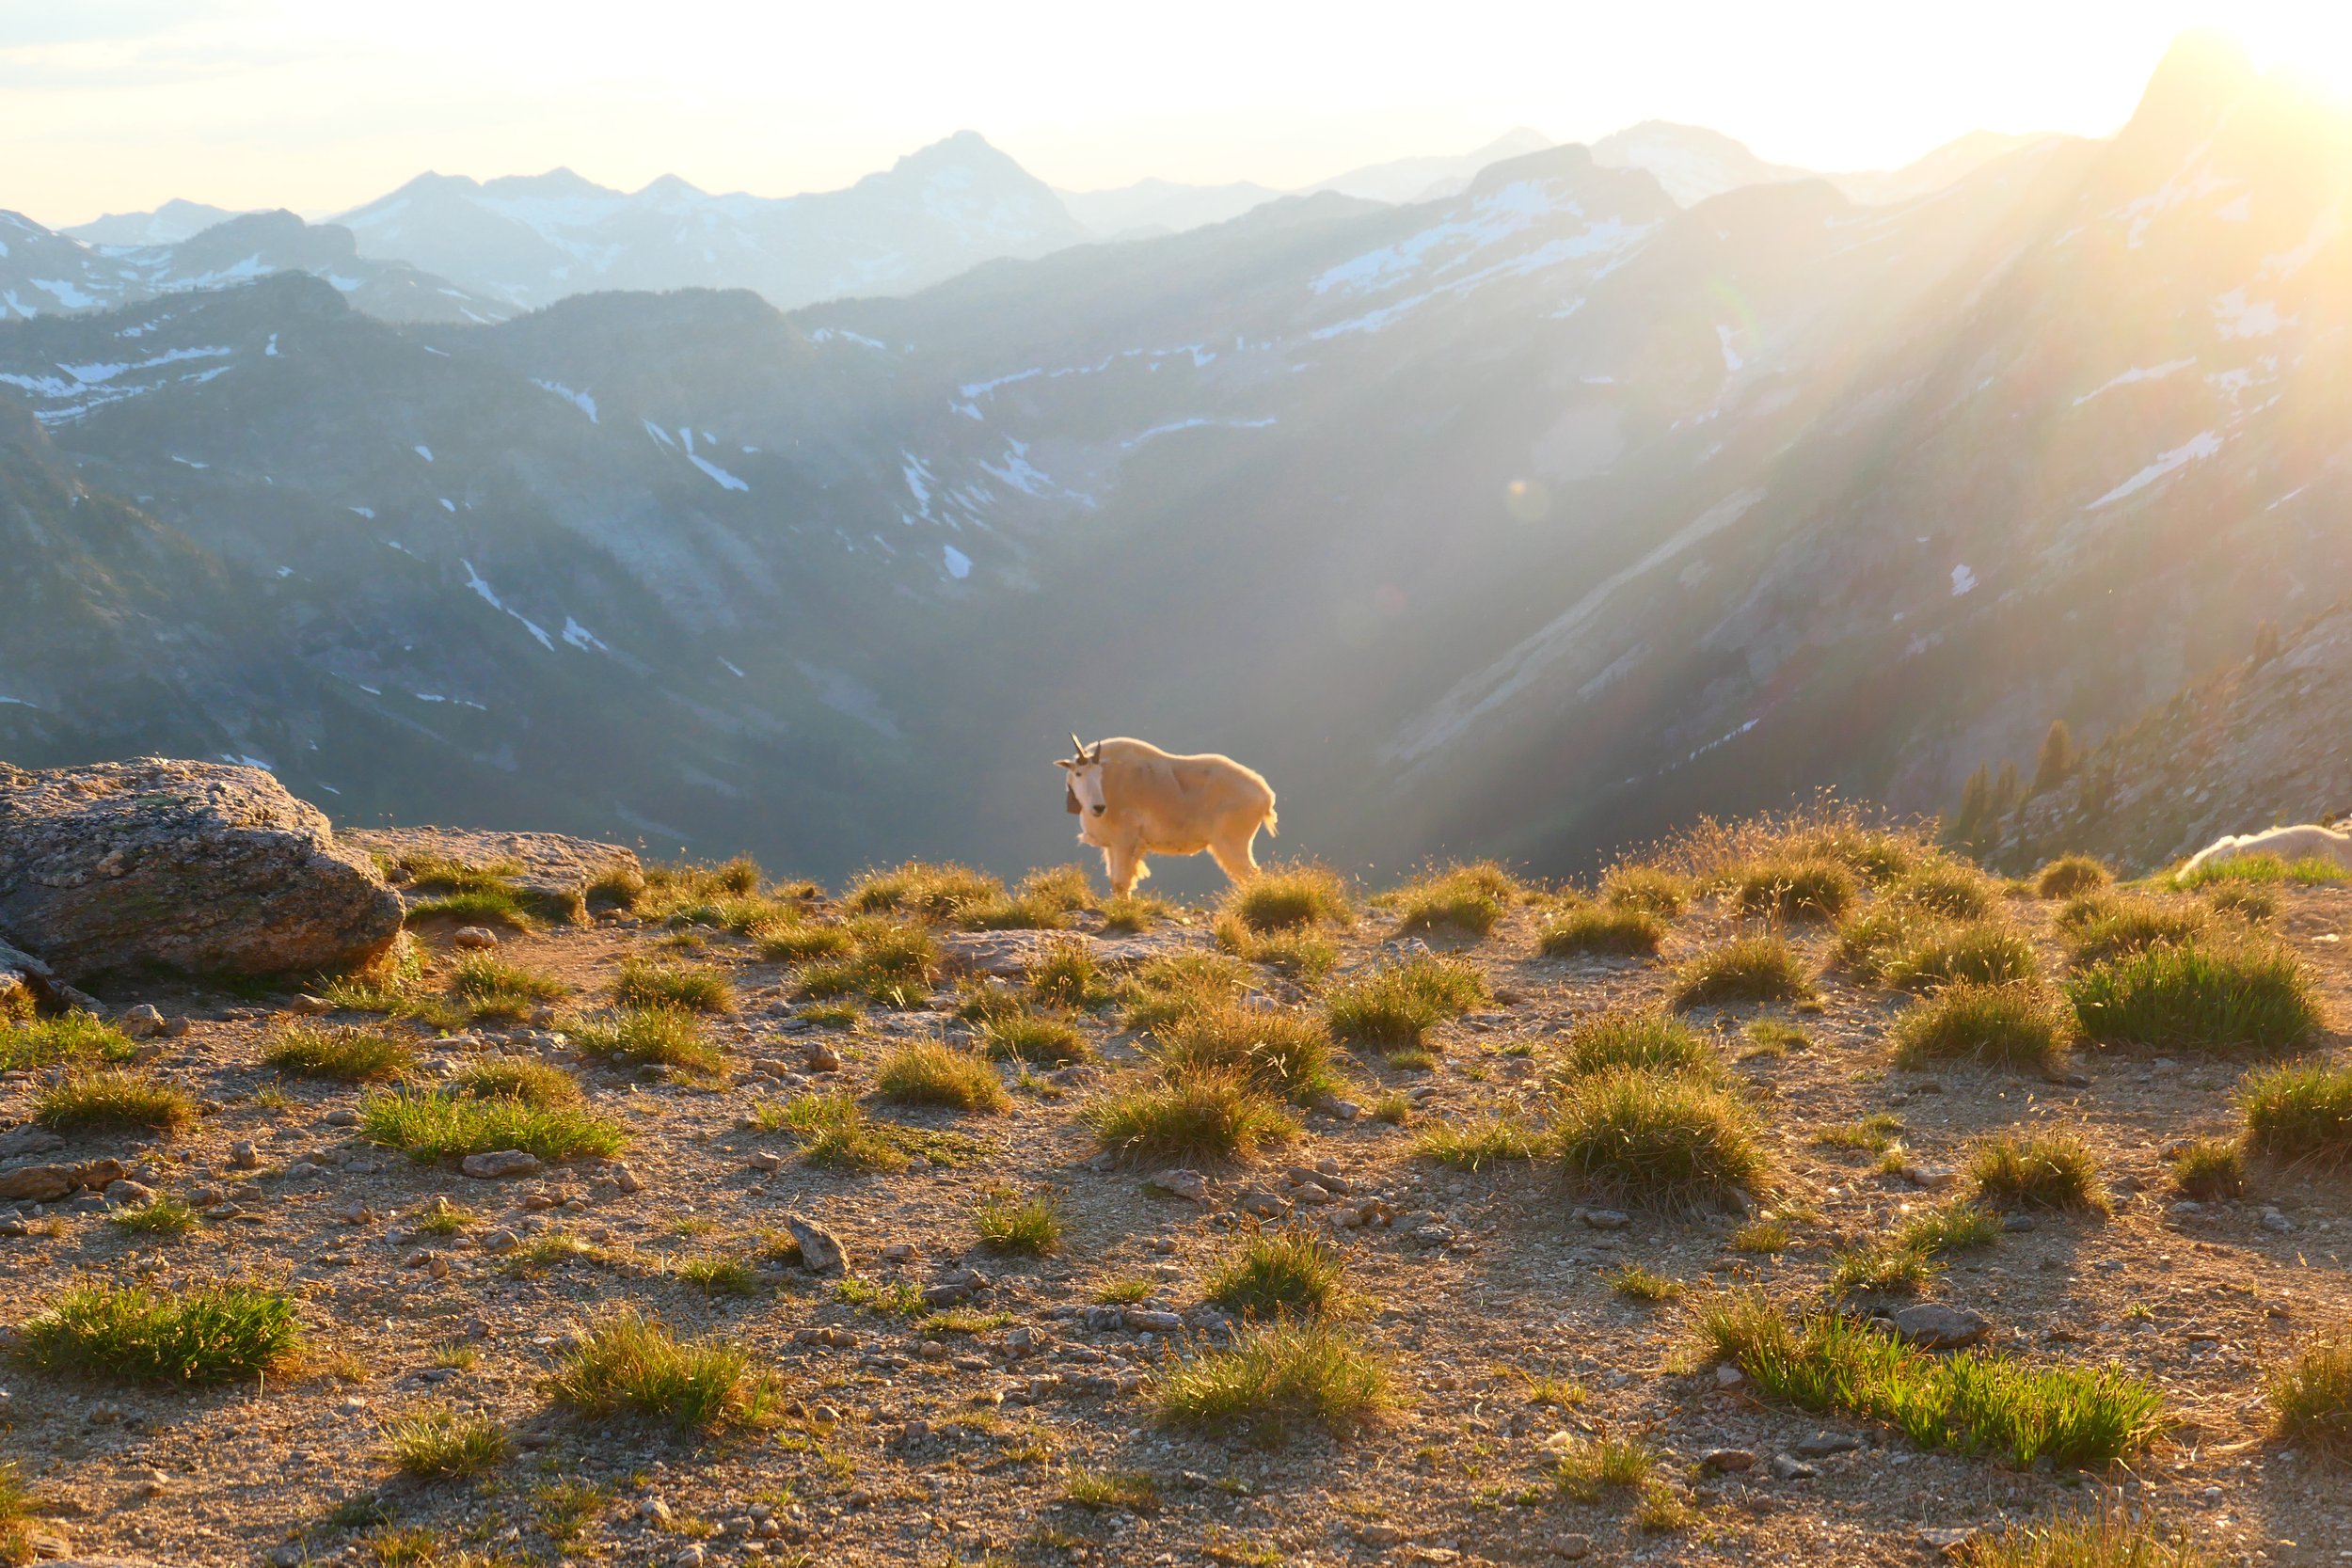 A lone goat silhouetted against the alpenglow.